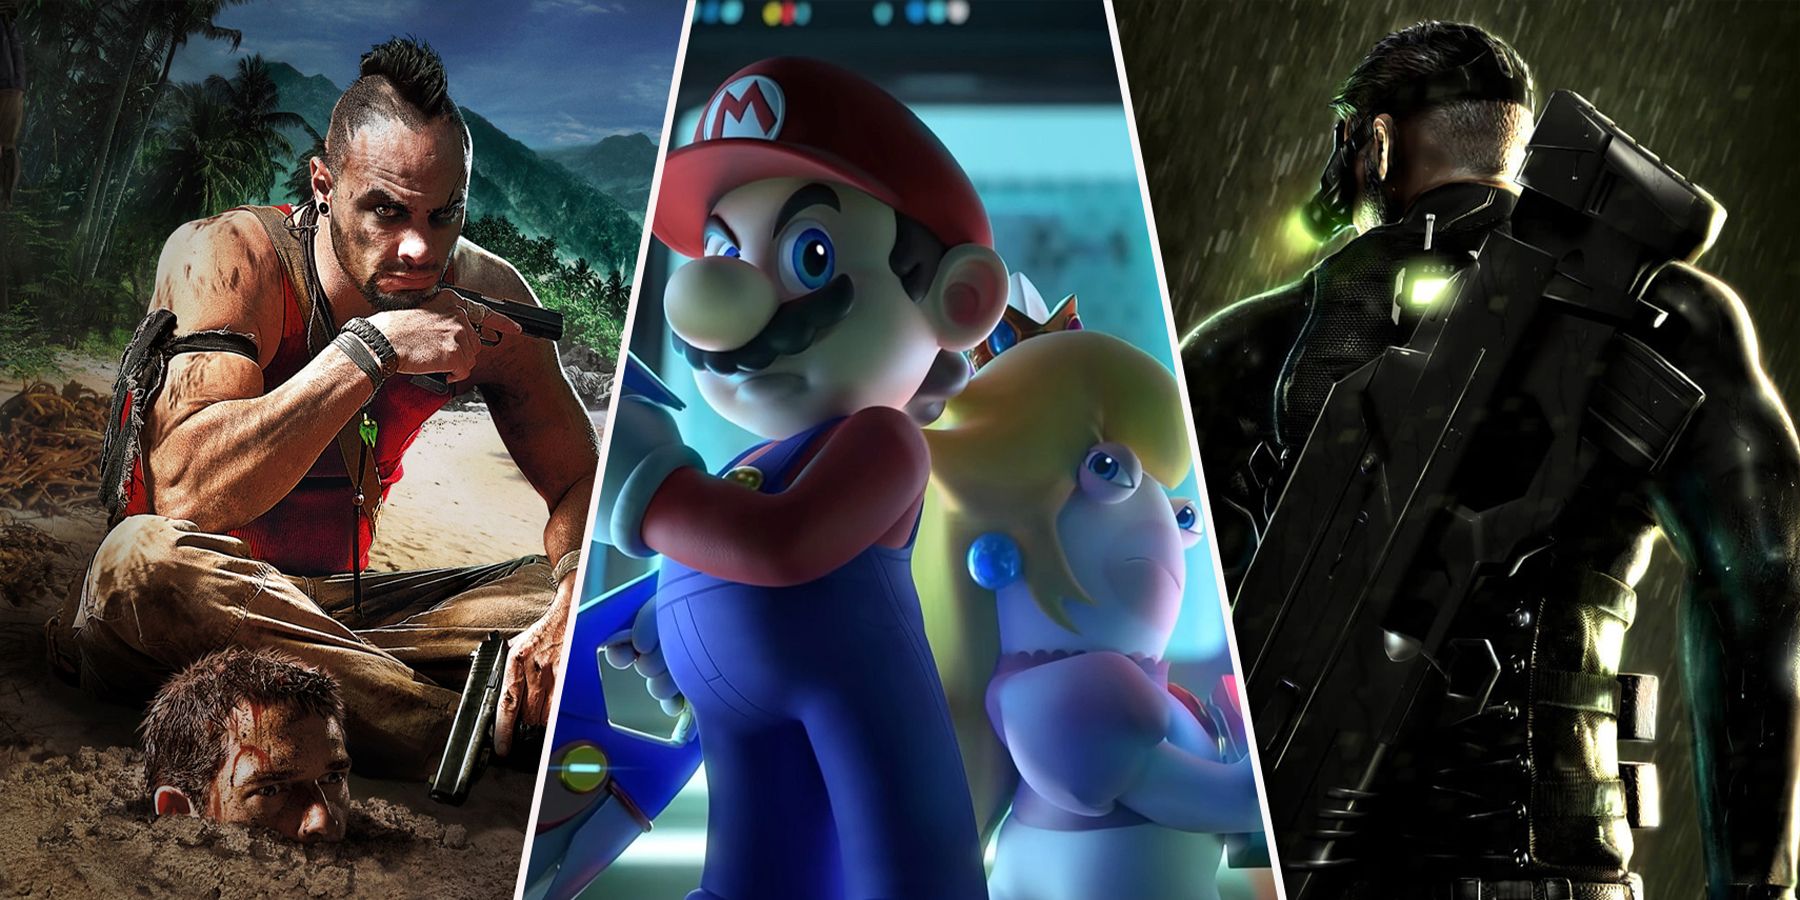 The Best Ubisoft Games Ever Made (According To Metacritic)